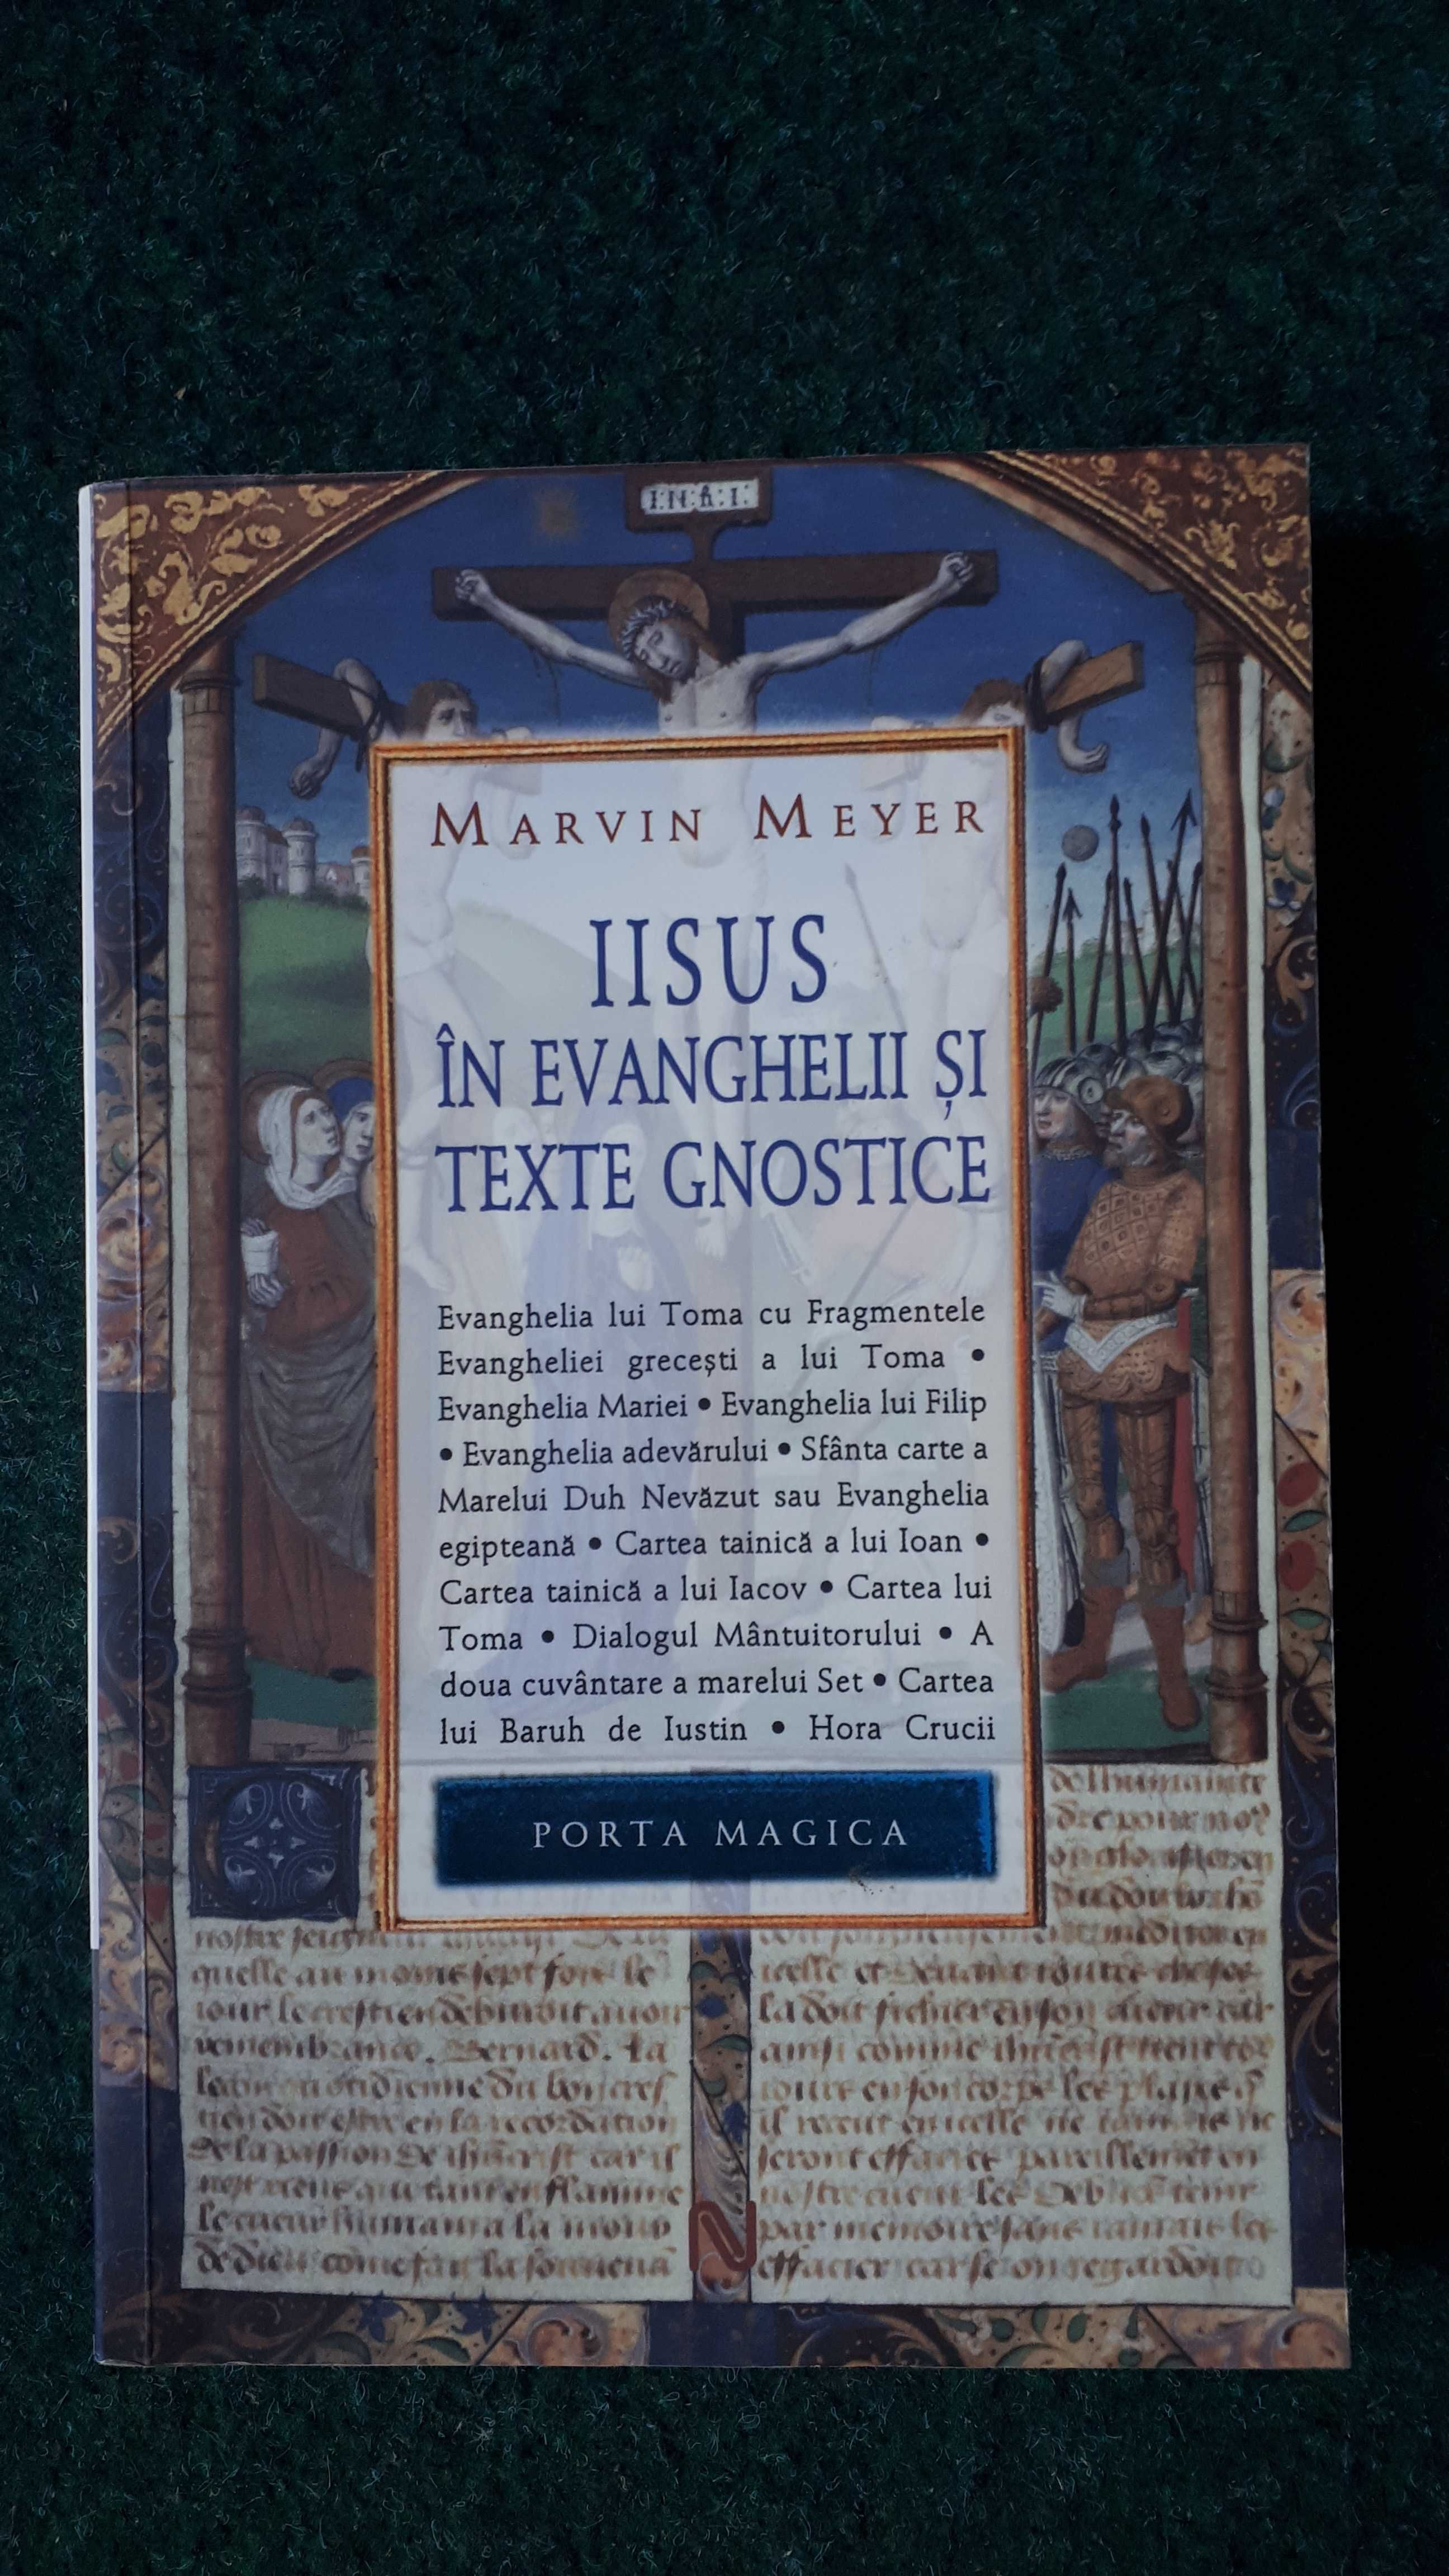 Iisus in evanghelii si texte gnostice, Marvin Meyer